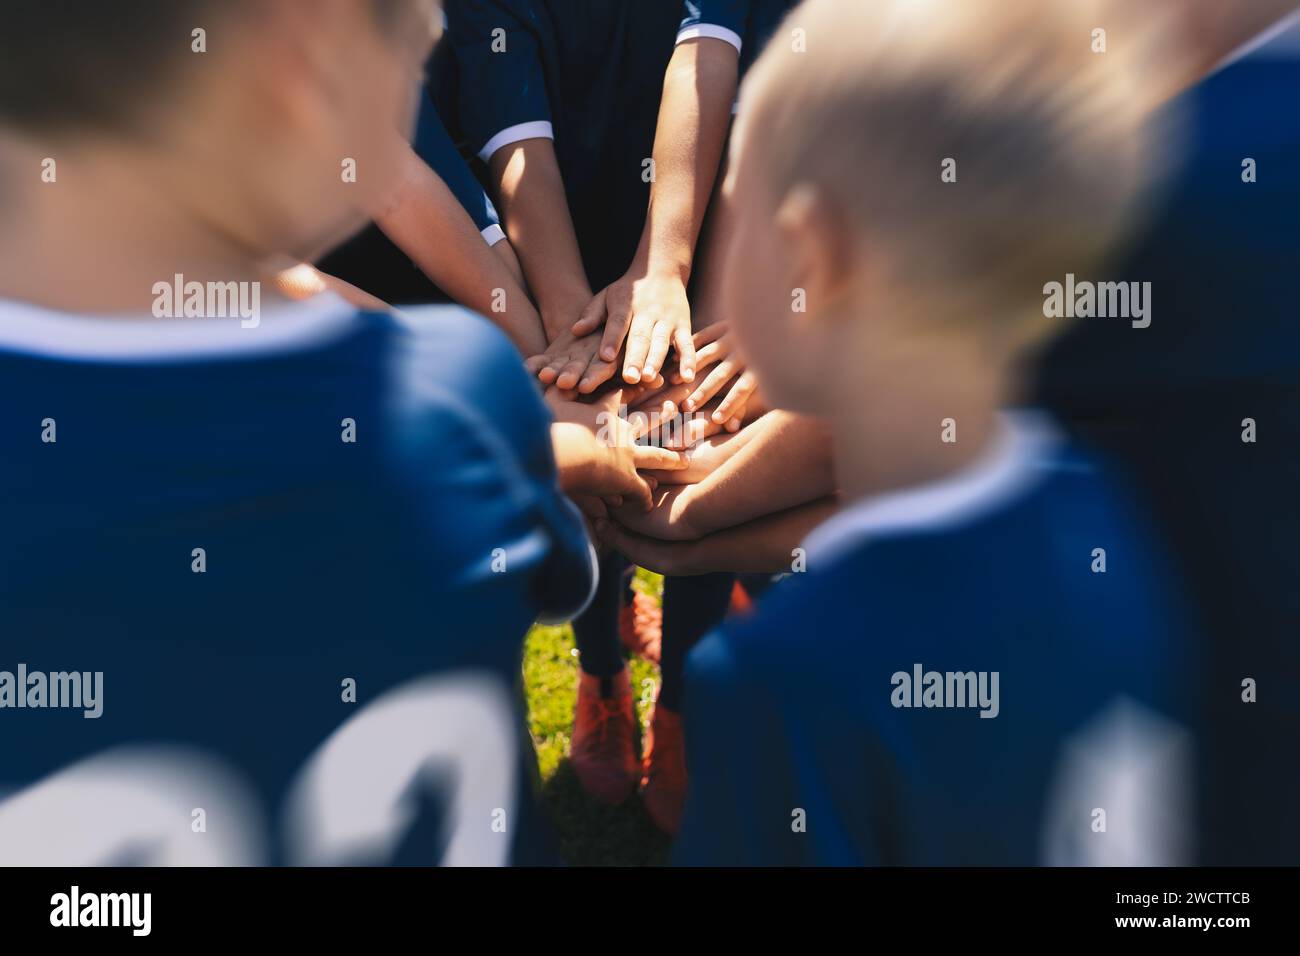 Happy Children Sports Team Stacking Hands. Kids Having Fun During Outdoor Physical Education Practice. Little Boys in Sports Clothes at Soccer Field Stock Photo